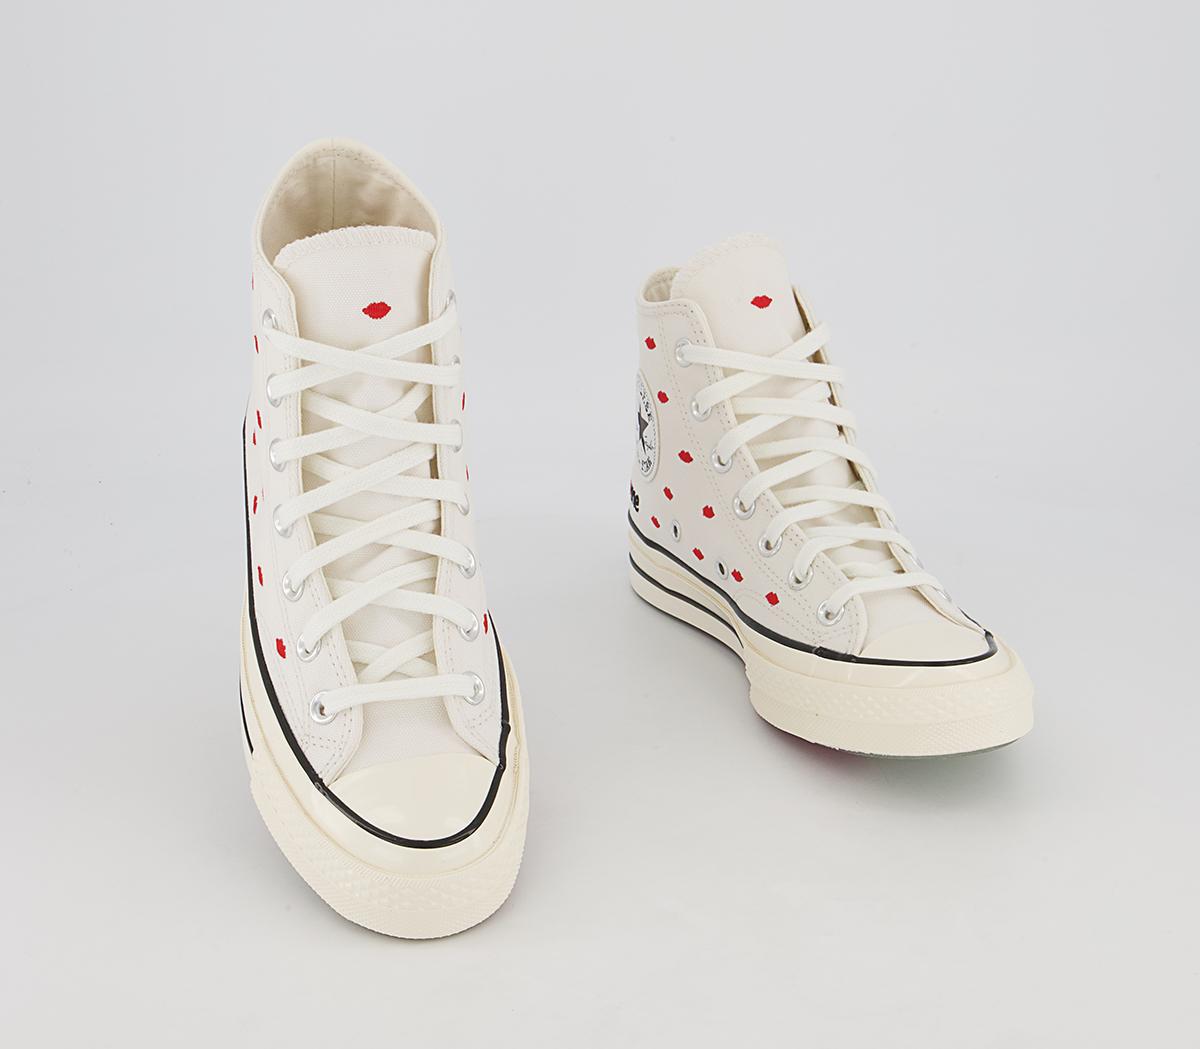 Converse All Star Hi 70s Trainers Vintage White University Red - Women ...